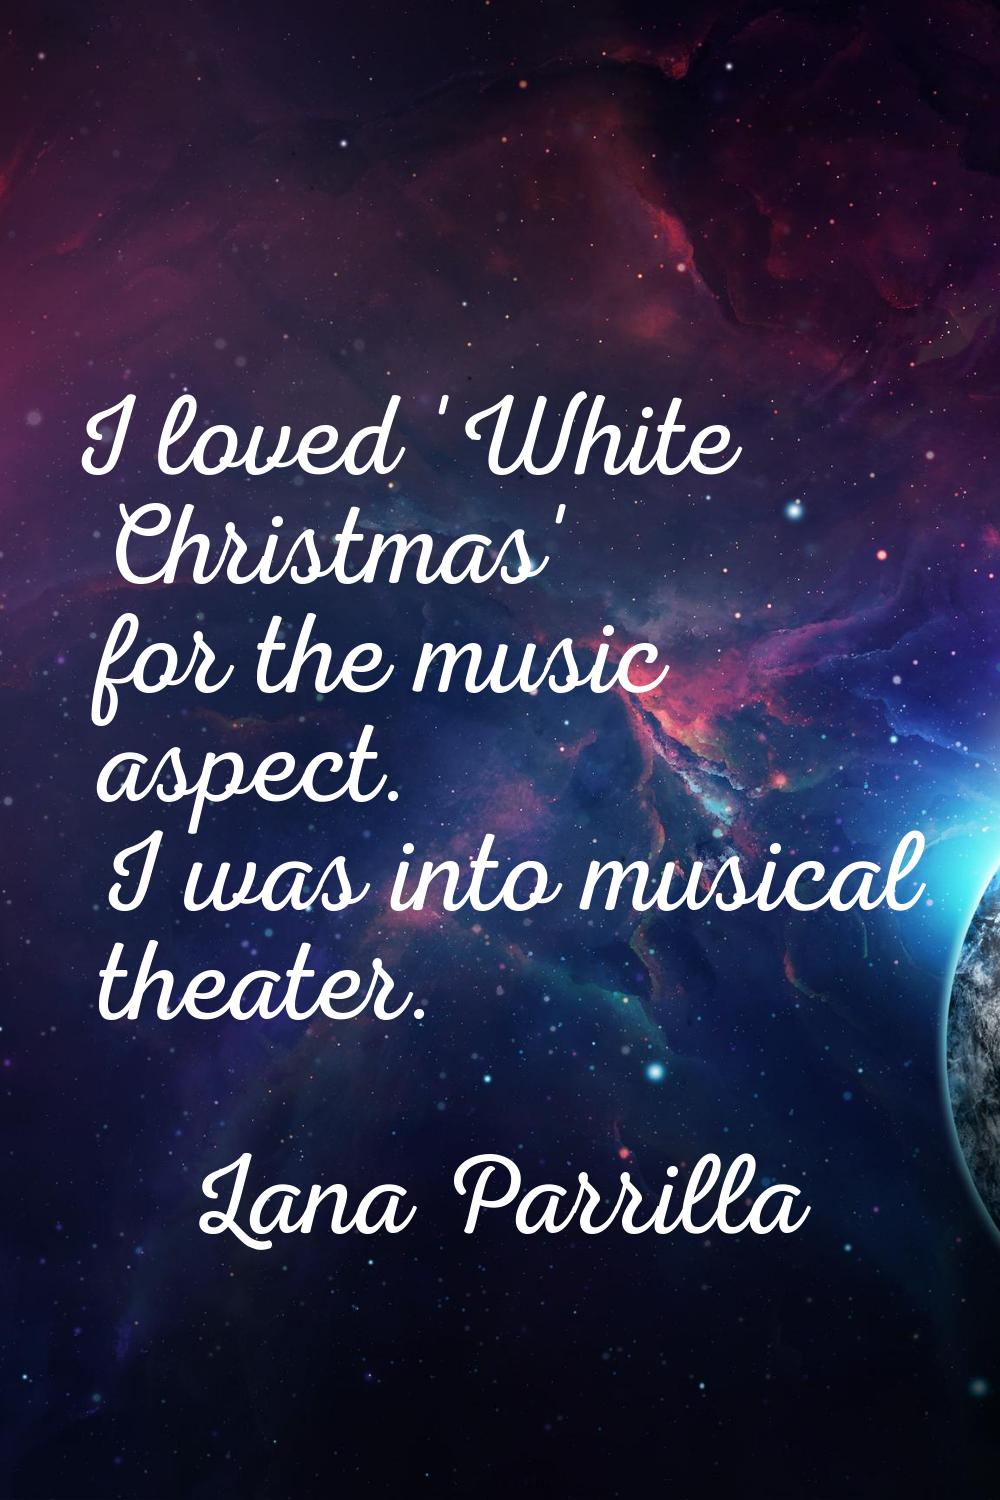 I loved 'White Christmas' for the music aspect. I was into musical theater.